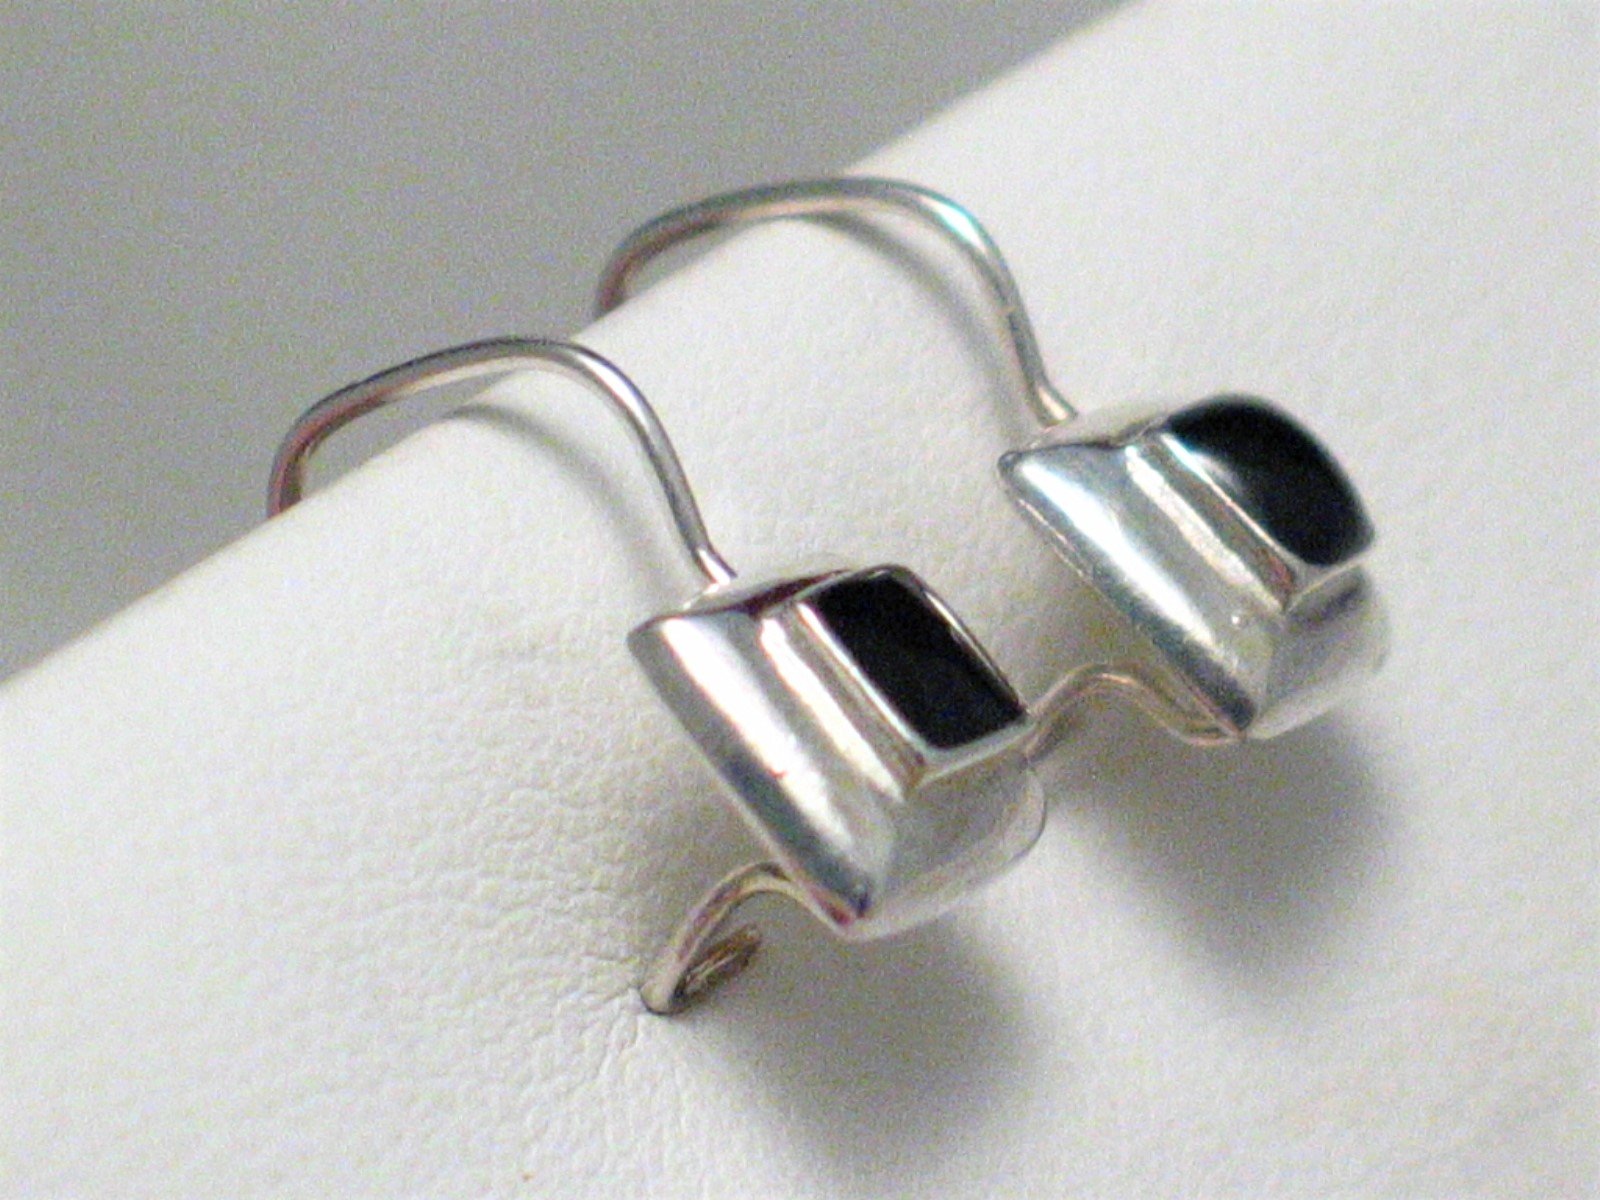 Sterling Silver Earrings, Petite Square Design Black Stone Drop Earrings - Low cost Pre-owned Designer Jewelry